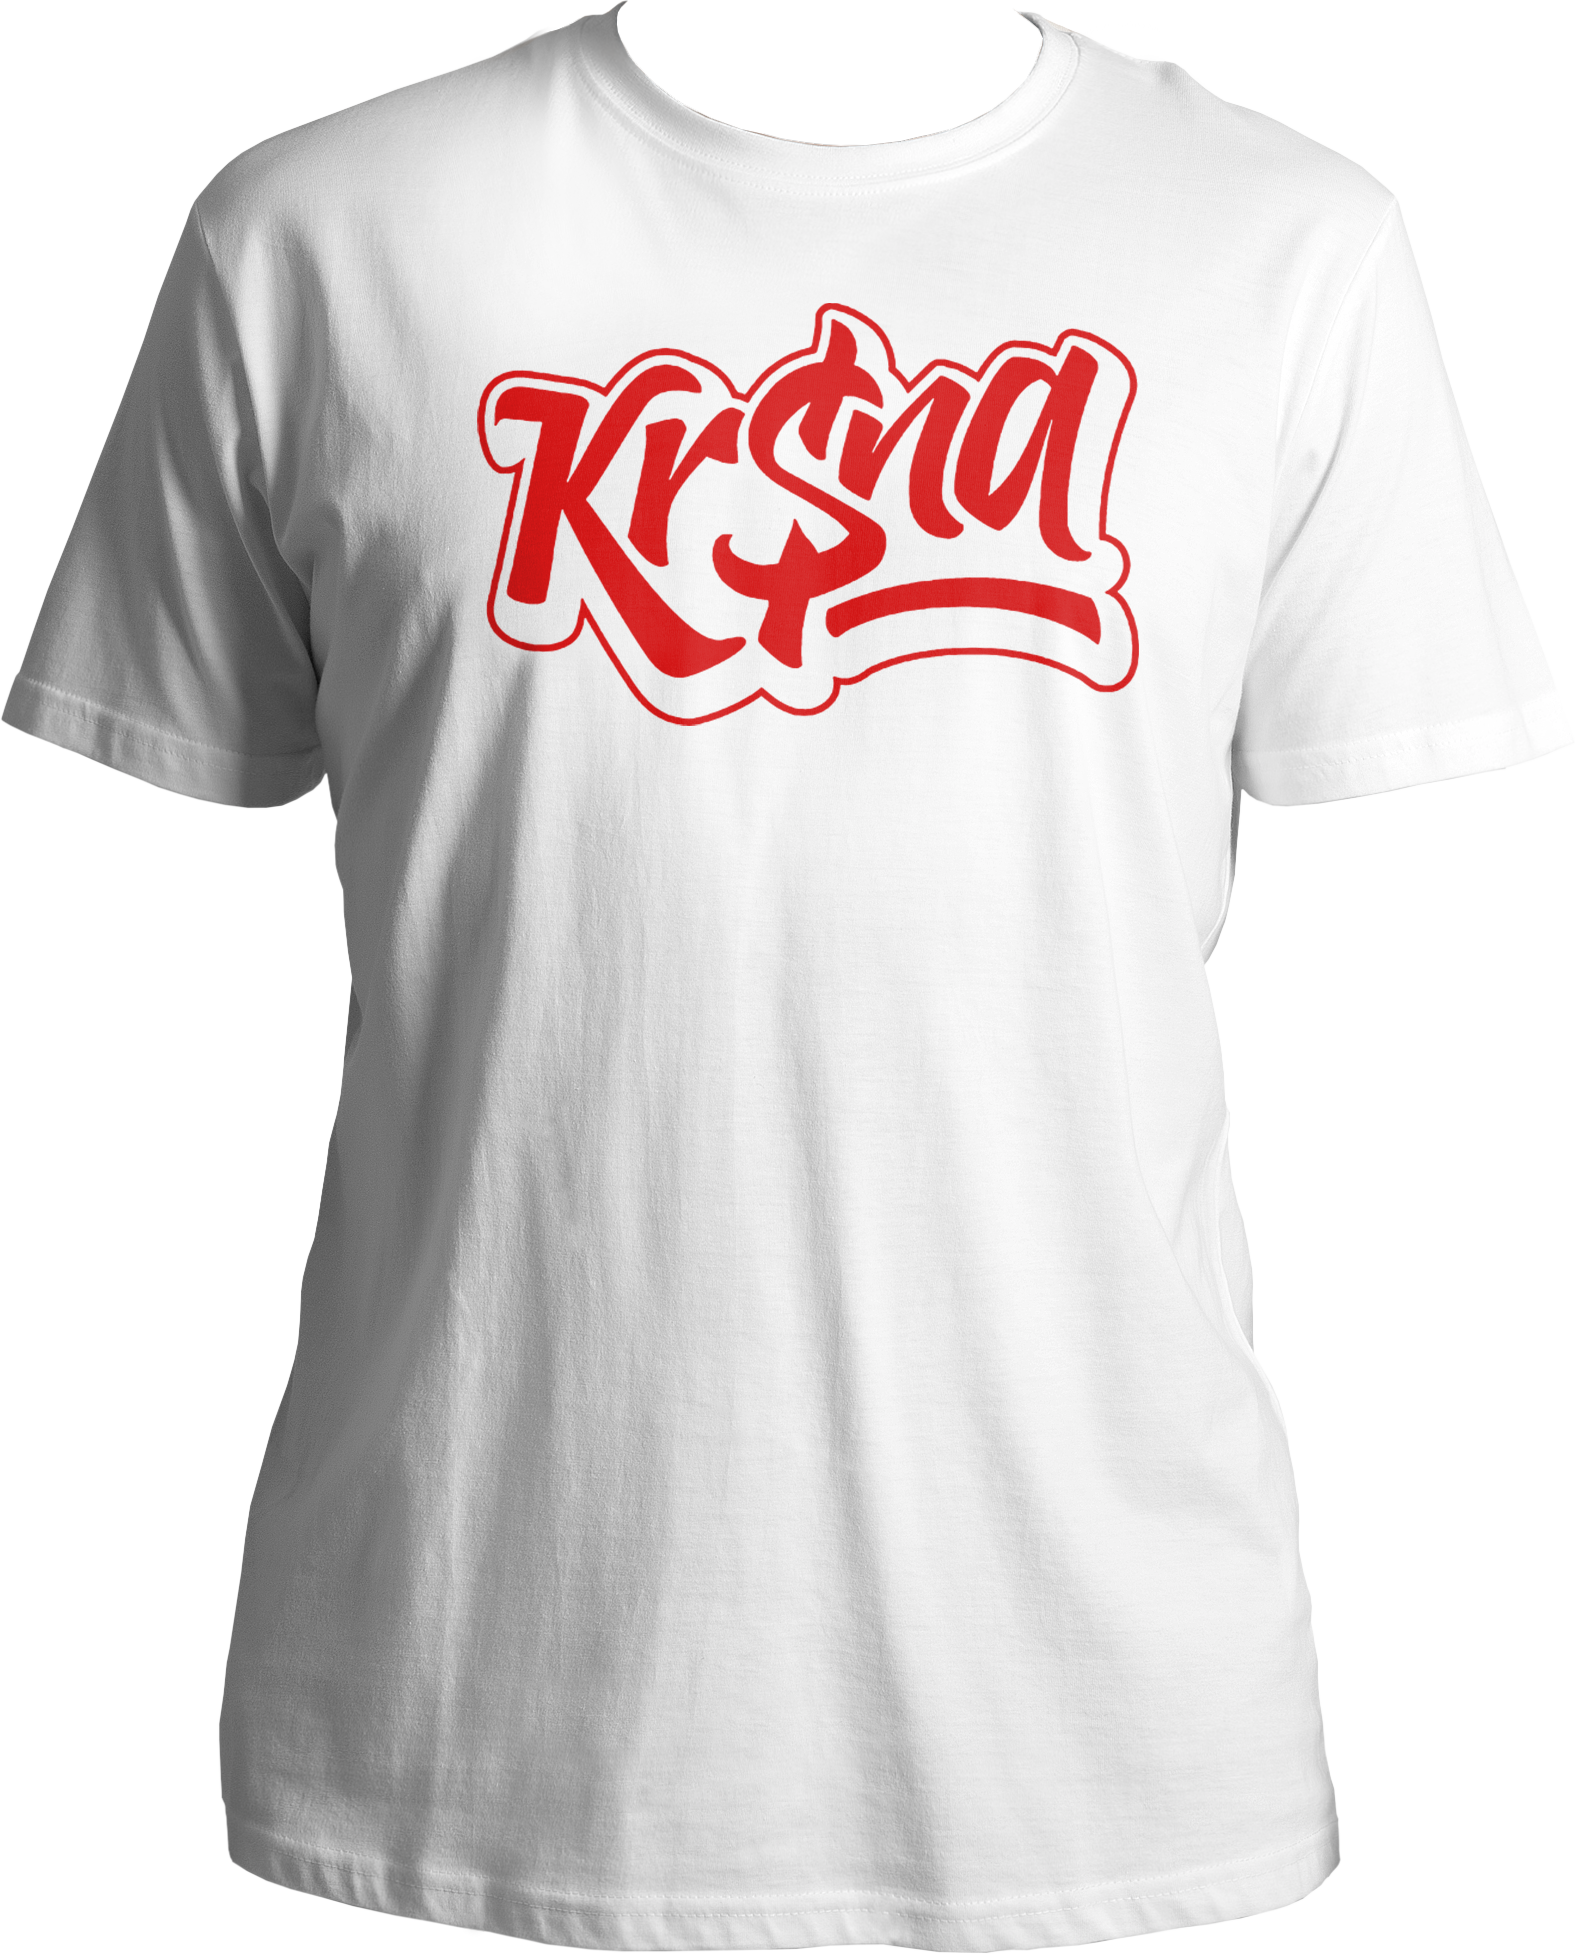 Attention all Krsna fans! Don't miss your chance to rock the same style as your favorite rapper. Our Krsna Unisex Cotton T-Shirt is the ultimate fashion statement for true aficionados. So why wait? Get yours today and show the world where your allegiance lies – with the one and only Krsna!